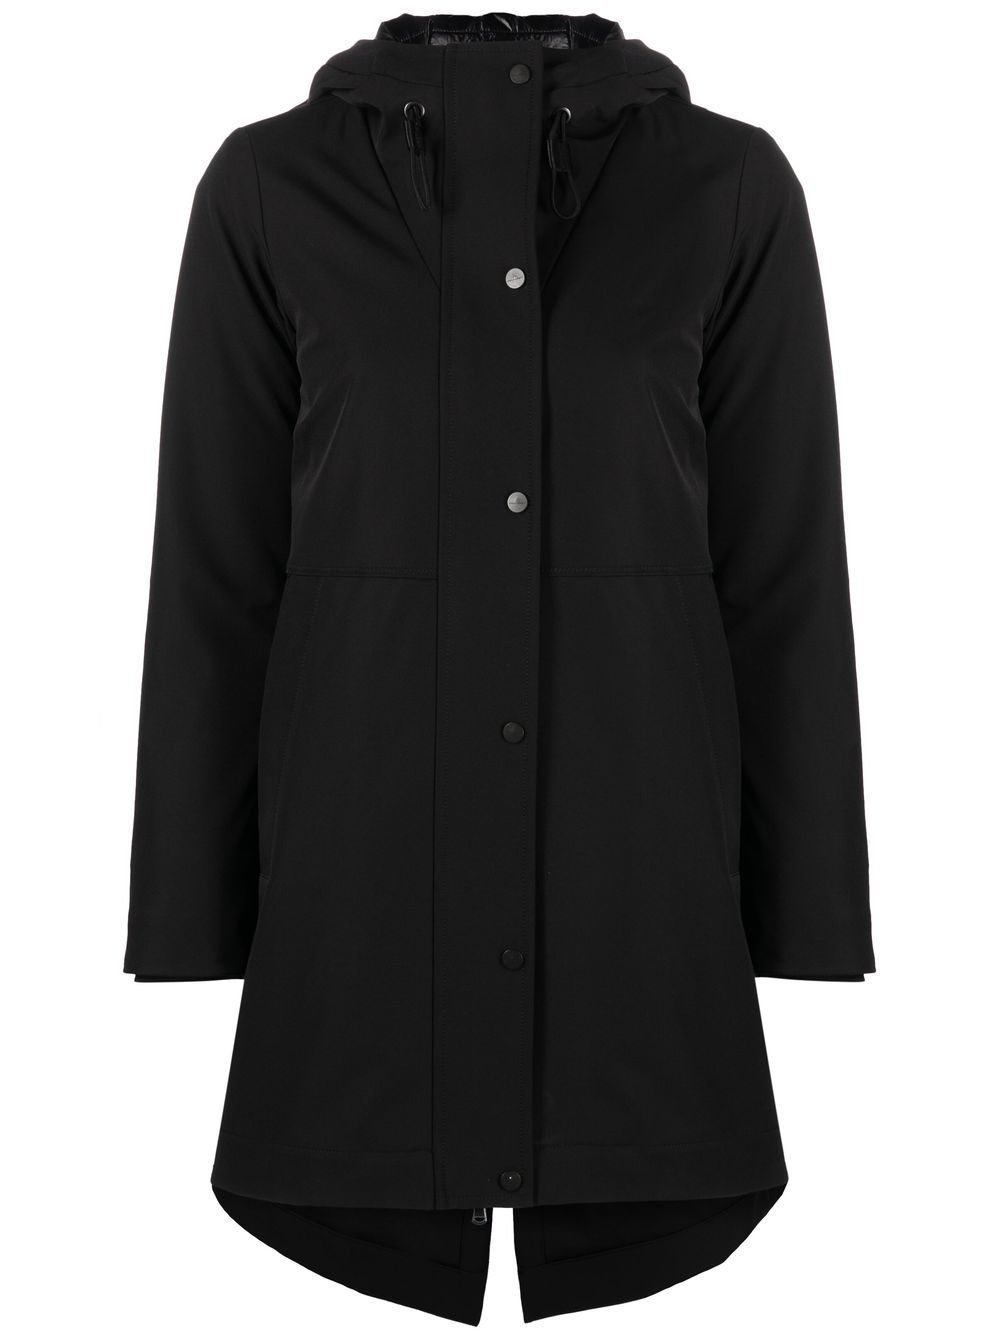 Peuterey Smooth Hooded Parka Coat - Farfetch